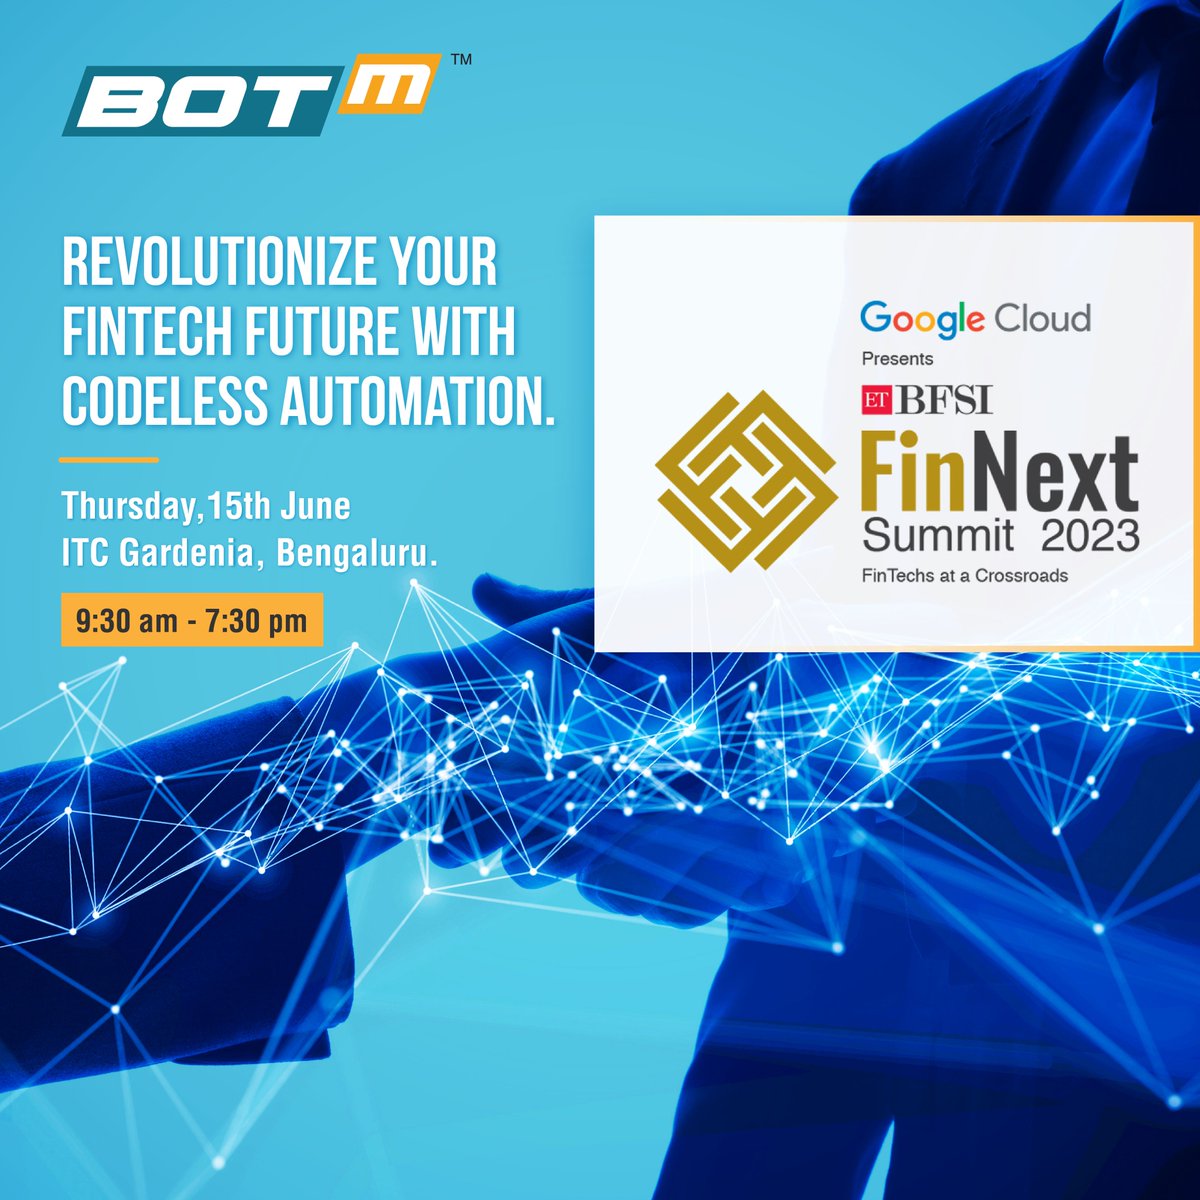 Join us at the FinNext Summit happening in Bengaluru and embark on an extraordinary journey of innovation and growth. 

#BOTm #FinNext2023 #finnextsummit2023 #fintech #FinTechevent #events #corporateevents #codelessautomation #codeless #automation #mobileapptesting #apptesting